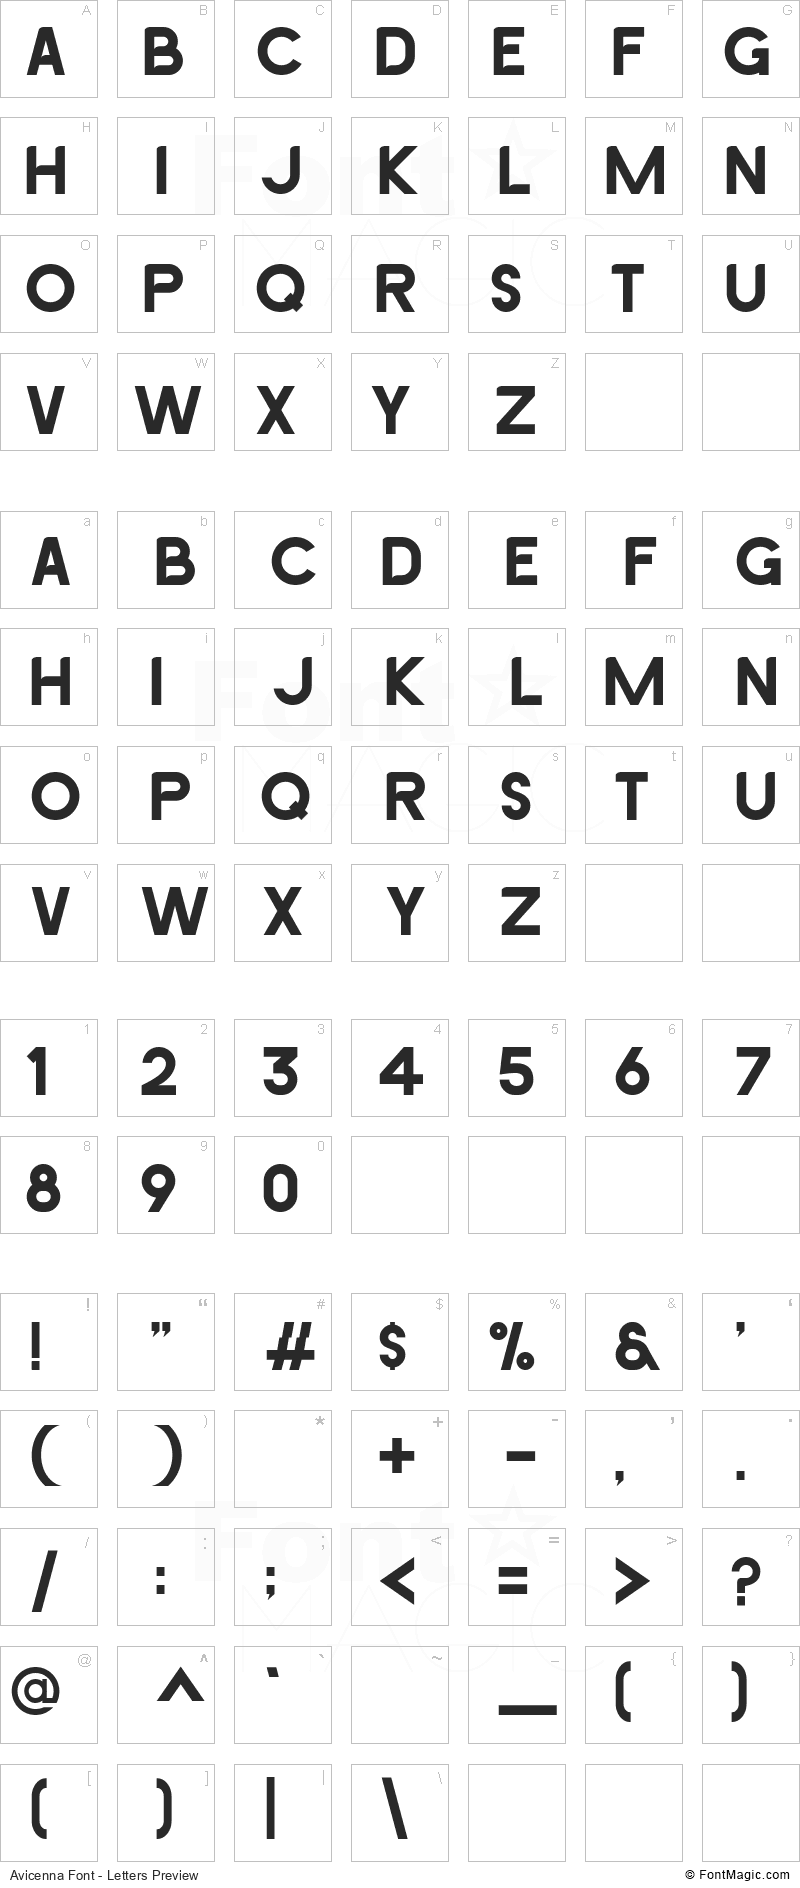 Avicenna Font - All Latters Preview Chart